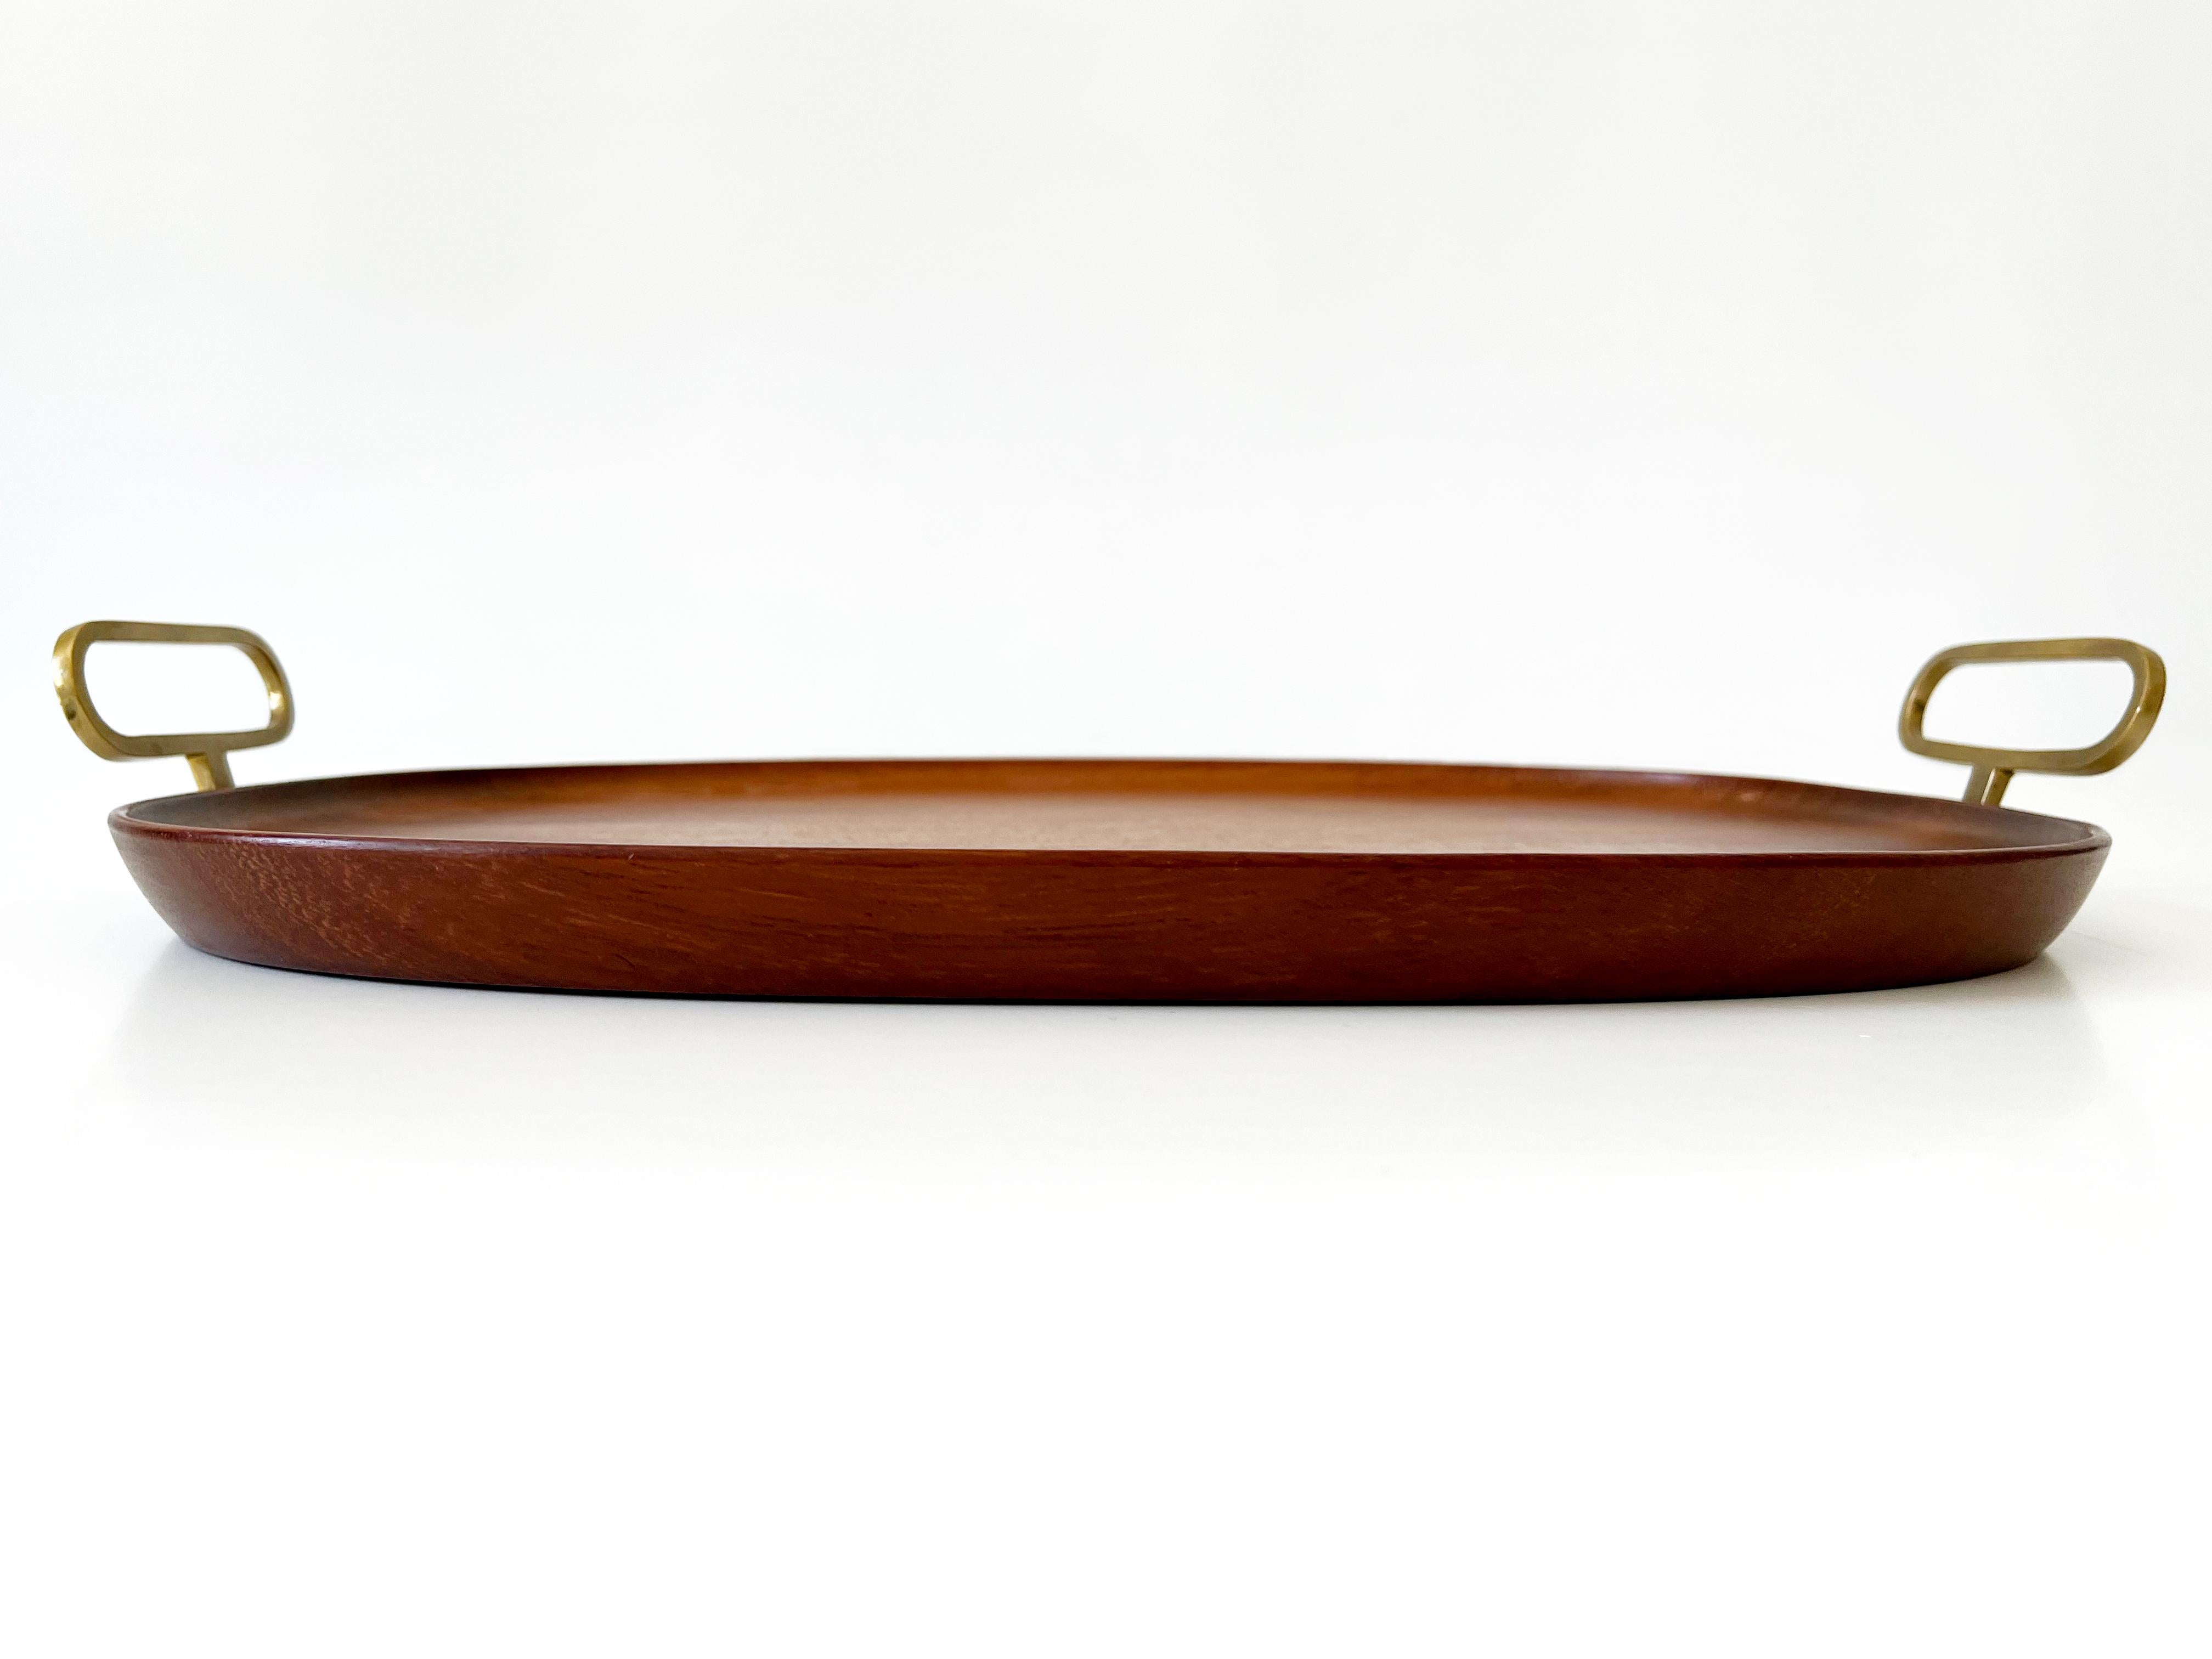 Extremely Rare Mid-Century Modern Teak Serving Tray by Carl Auböck Austria 1950s For Sale 2